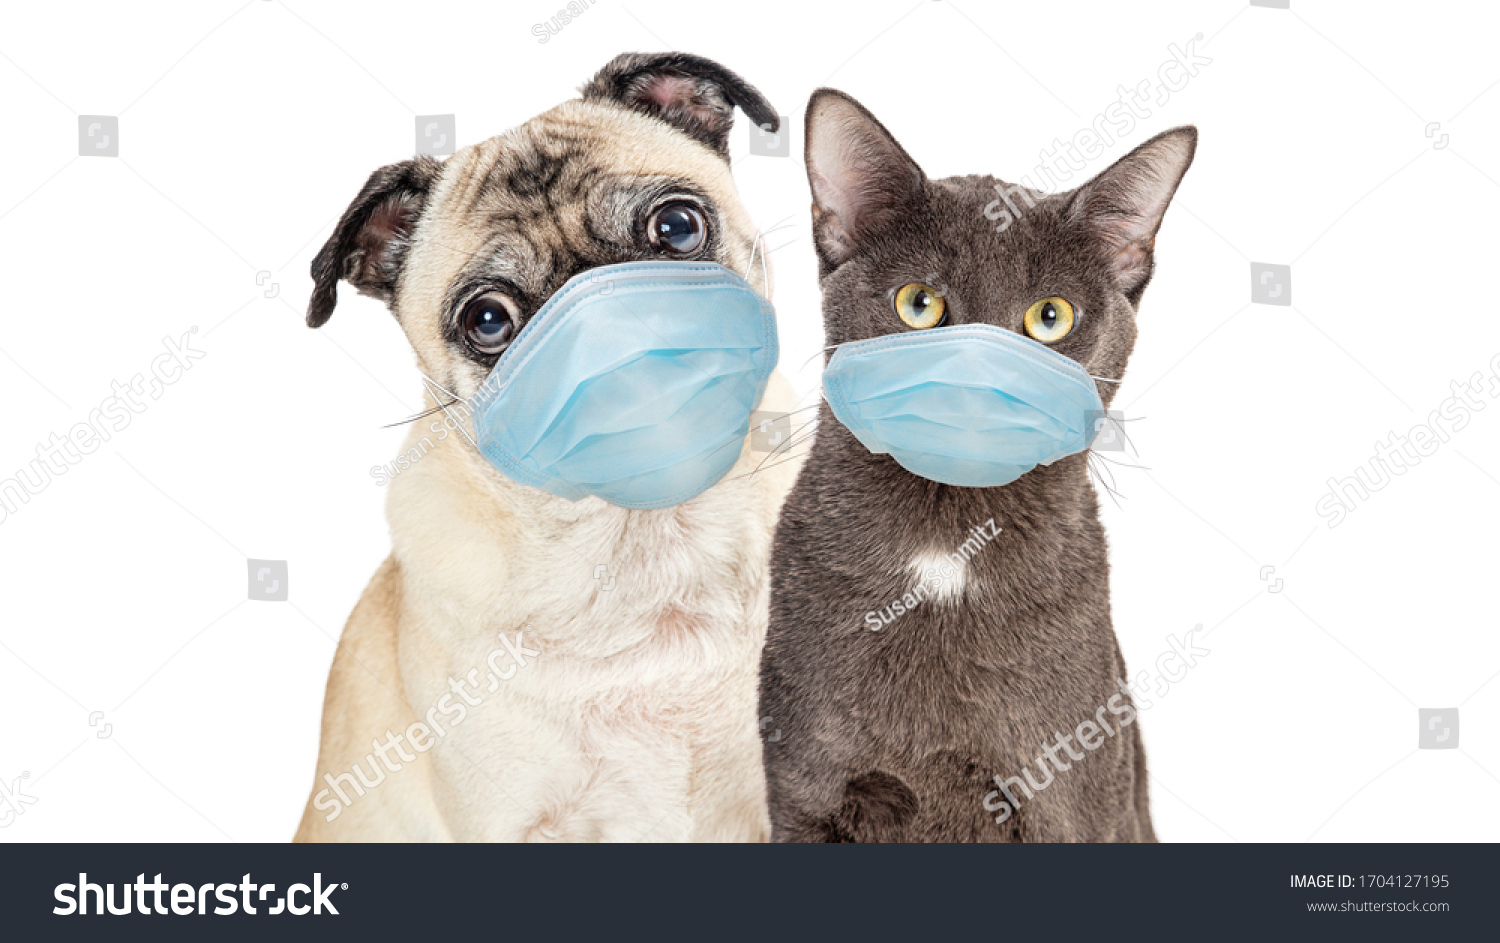 Cute Pug purebred dog and grey cat wearing protective surgical face masks  looking forward at camera isolated on white background #1704127195